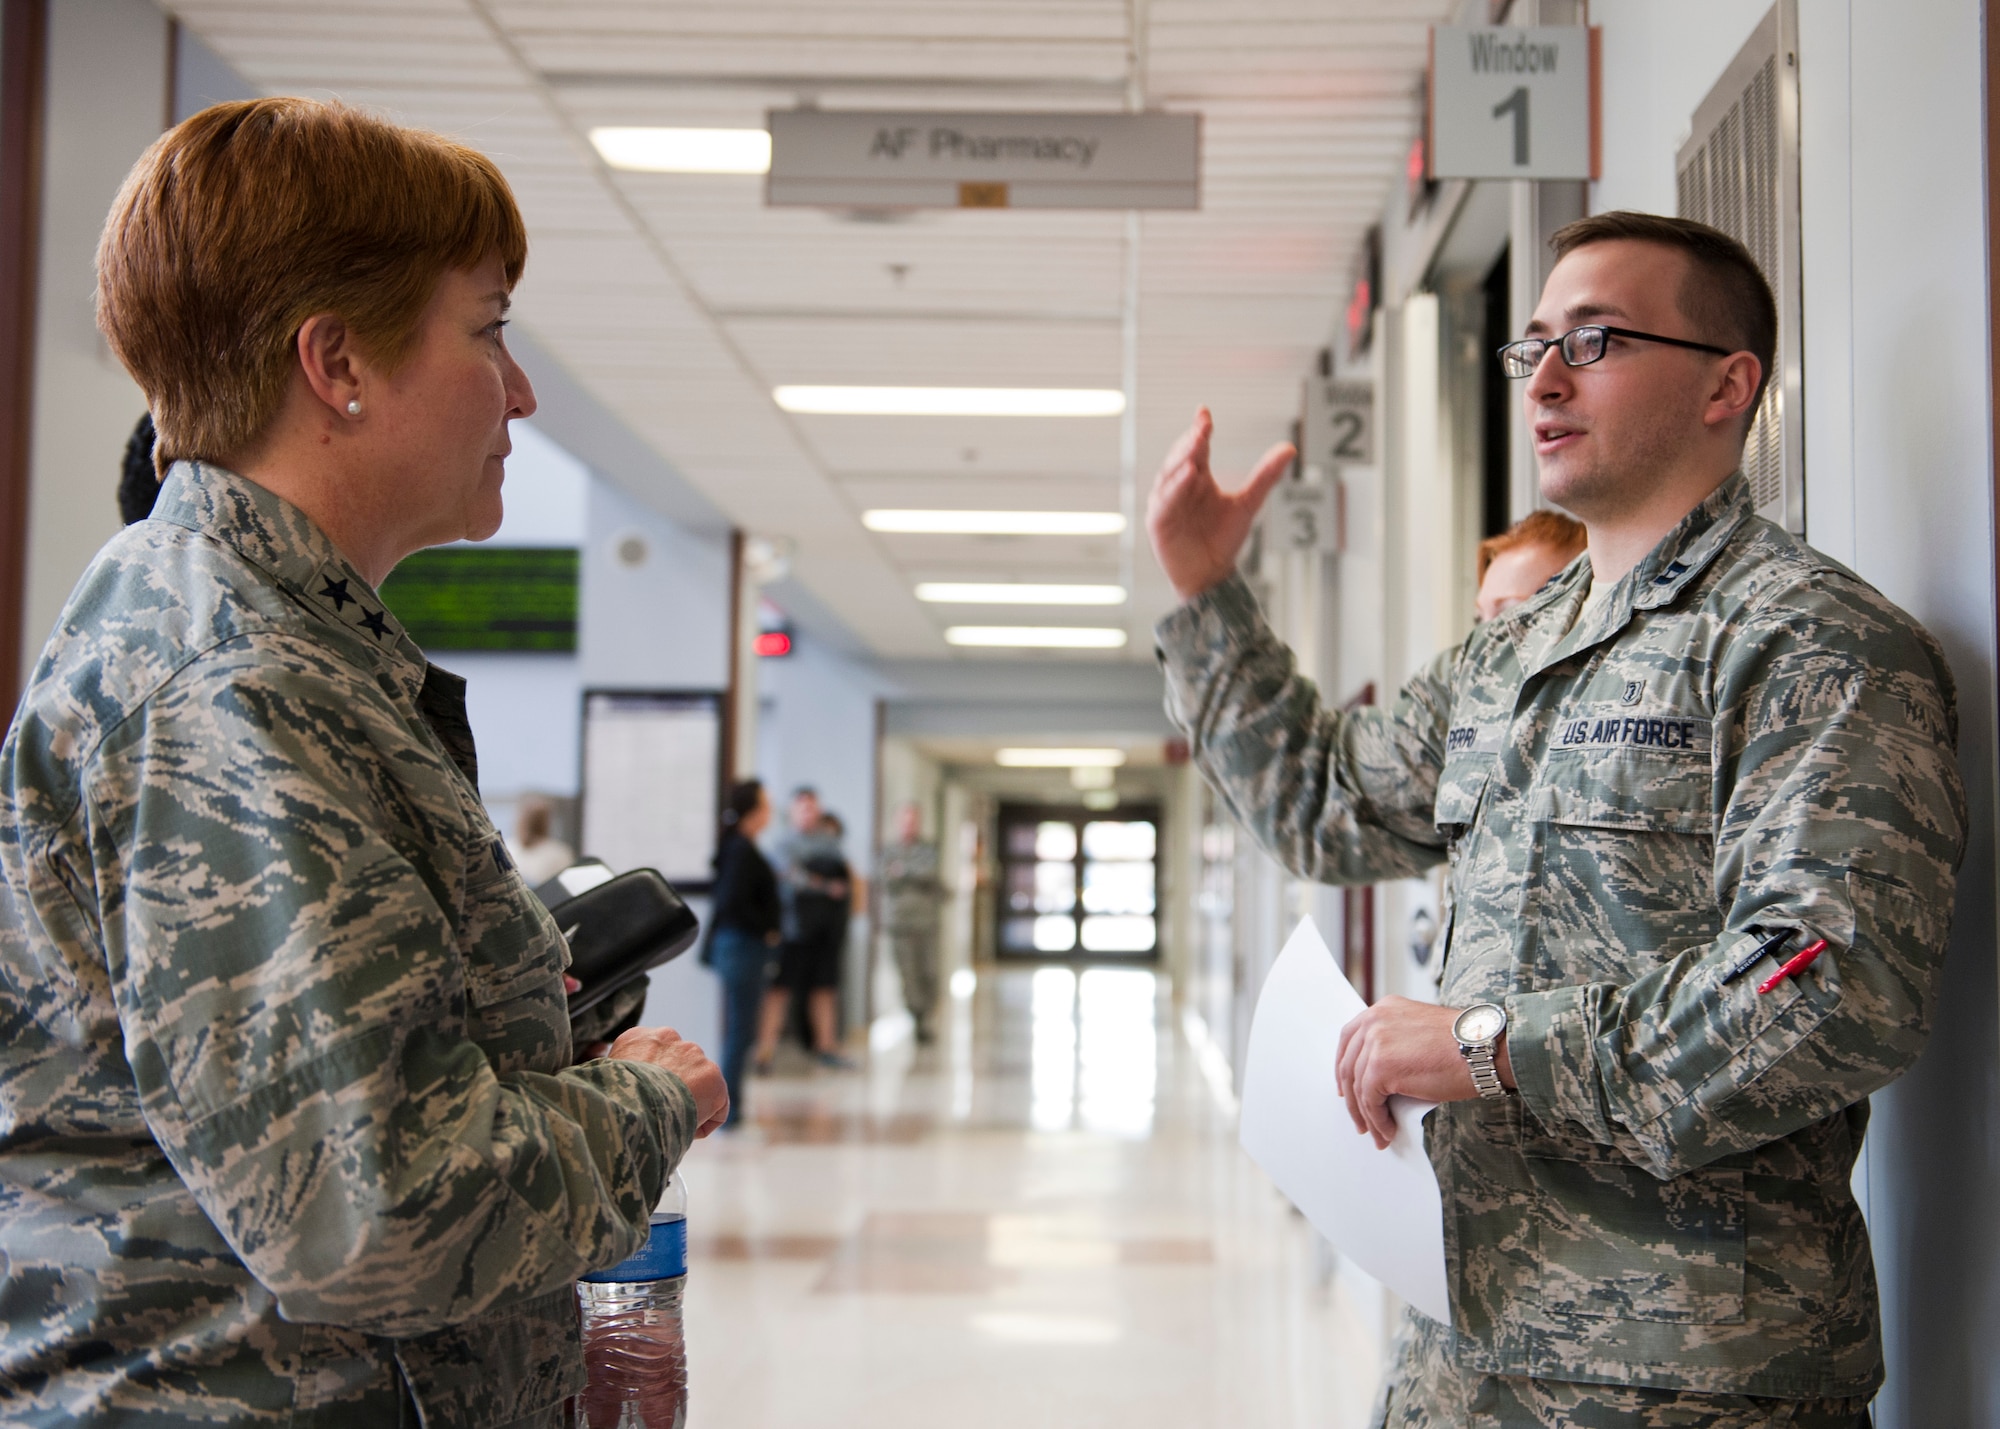 Capt. Victor Perri (right), 99th Medical Support Squadron pharmacist, briefs Maj. Gen. Dorothy Hogg, U.S. Air Force director of medical operations and research and chief of the nurse corps, on the operations of the pharmacy at the Mike O’Callaghan Federal Medical Center, Nellis Air Force Base, Nev., Jan. 13, 2015. Hogg was visiting Nellis and the nearby University Medical Center of Southern Nevada to discuss the benefits of the Sustained Medical and Readiness Trained, or SMART, program. (U.S. Air Force photo by Senior Airman Thomas Spangler) 